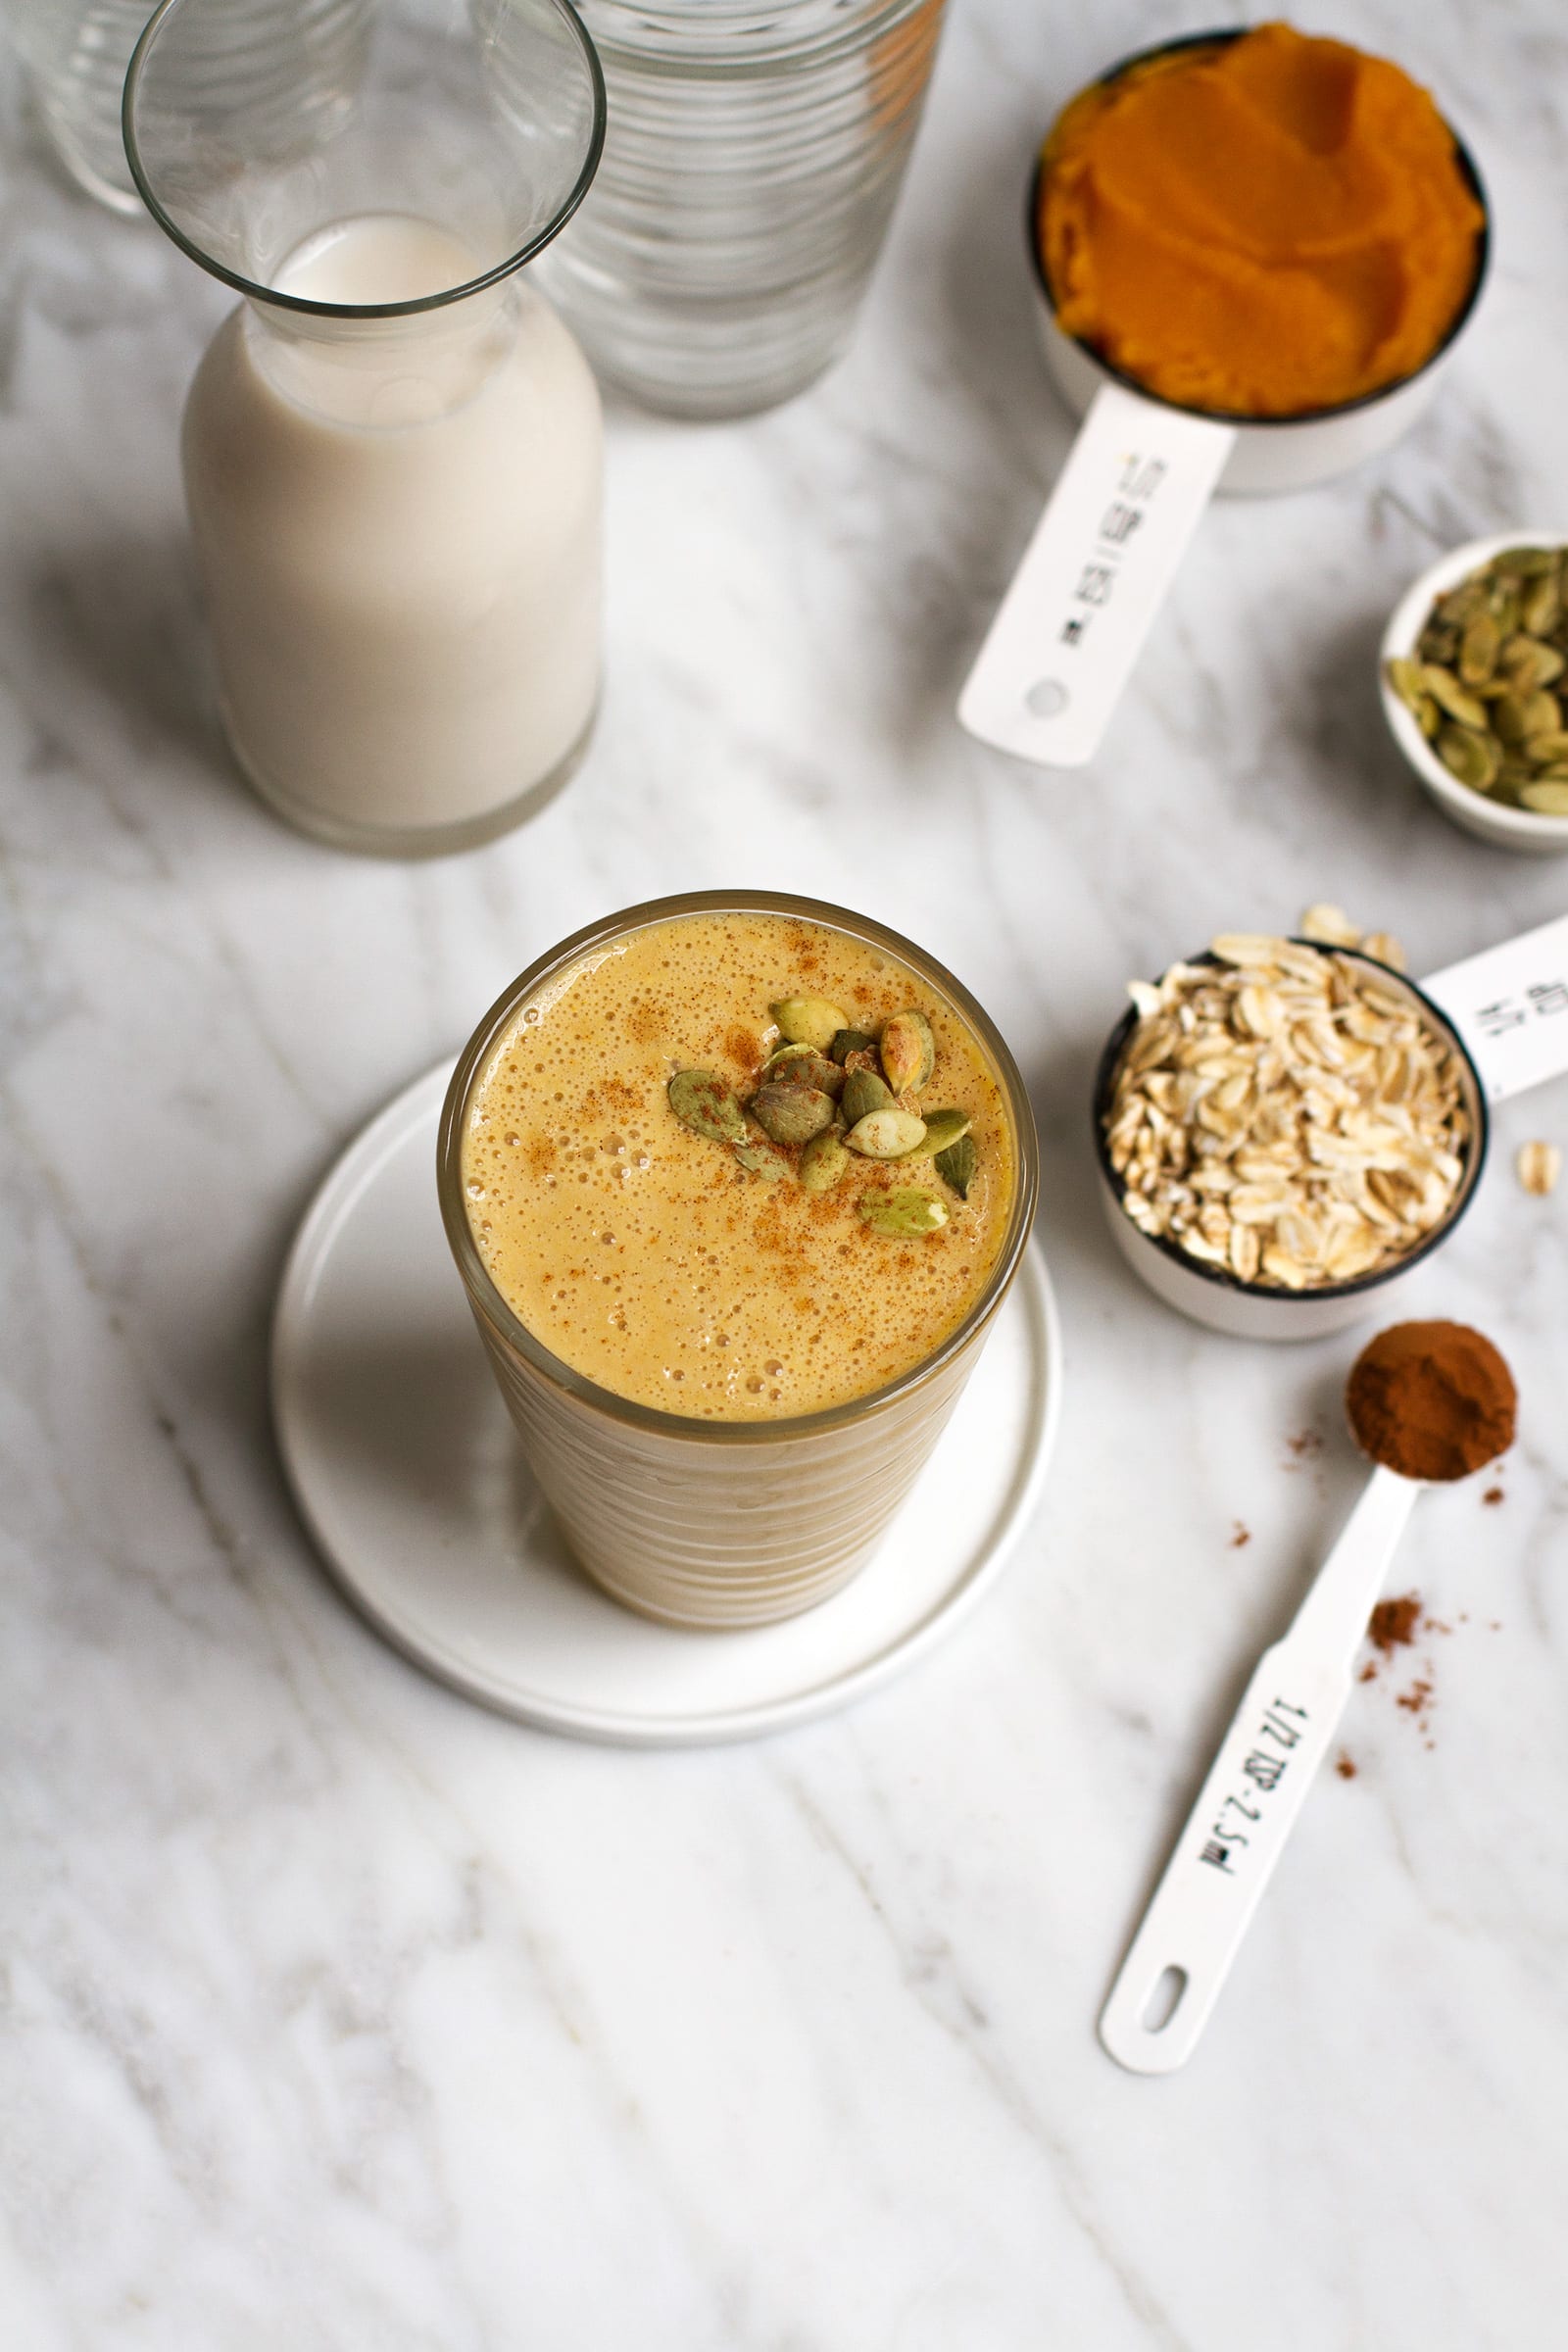 10 Healthy Whole Foods Recipes To Cleanse After Vacation || Pumpkin Spice Oatmeal Smoothie Recipe | www.saltandwind.com